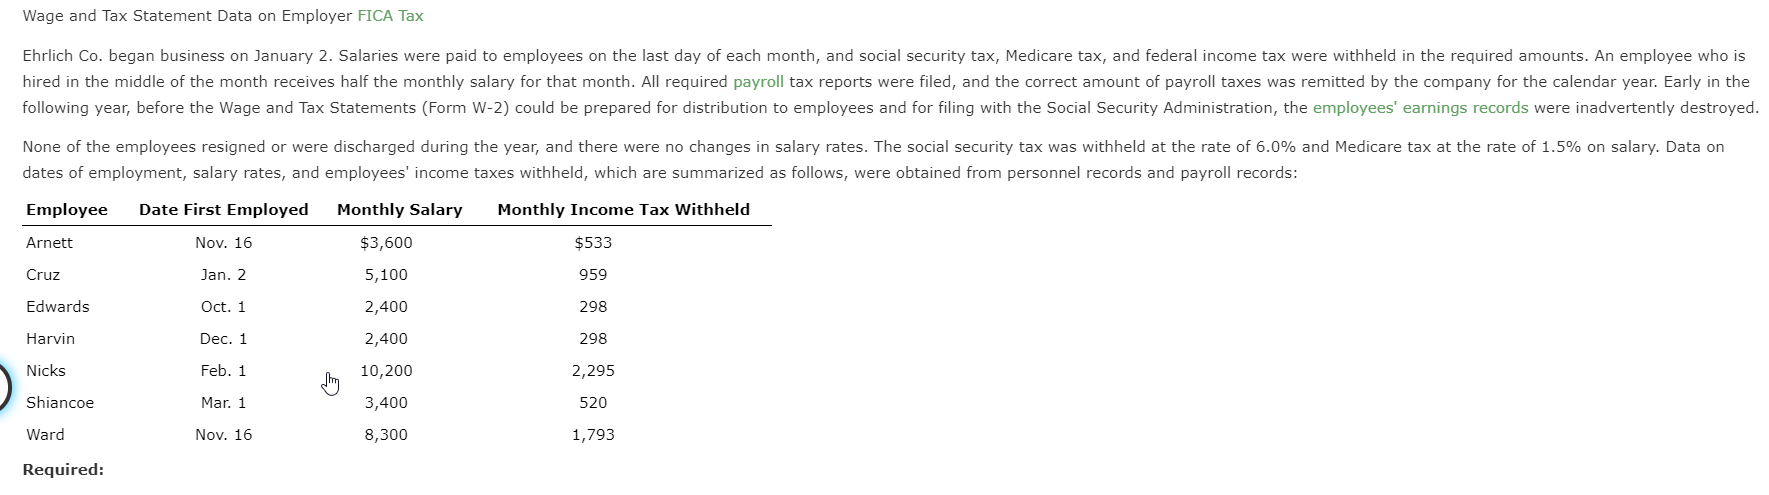 Wage and Tax Statement Data on Employer FICA Tax
Ehrlich Co. began business on January 2. Salaries were paid to employees on the last day of each month, and social security tax, Medicare tax, and federal income tax were withheld in the required amounts. An employee who is
hired in the middle of the month receives half the monthly salary for that month. All required payroll tax reports were filed, and the correct amount of payroll taxes was remitted by the company for the calendar year. Early in the
following year, before the Wage and Tax Statements (Form W-2) could be prepared for distribution to employees and for filing with the Social Security Administration, the employees' earnings records were inadvertently destroyed.
None of the employees resigned or were discharged during the year, and there were no changes in salary rates. The social security tax was withheld at the rate of 6.0% and Medicare tax at the rate of 1.5% on salary. Data on
dates of employment, salary rates, and employees' income taxes withheld, which are summarized as follows, were obtained from personnel records and payroll records:
Date First Employed
Nov. 16
Employee
Monthly Salary
Monthly Income Tax Withheld
$533
Arnett
$3,600
Cruz
Jan. 2
959
5,100
Edwards
Oct. 1
Dec. 1
2,400
298
Harvin
2,400
298
Nicks
Feb. 1
2,295
10,200
Shiancoe
Mar. 1
3,400
520
Nov. 16
1,793
Ward
8,300
Required:
